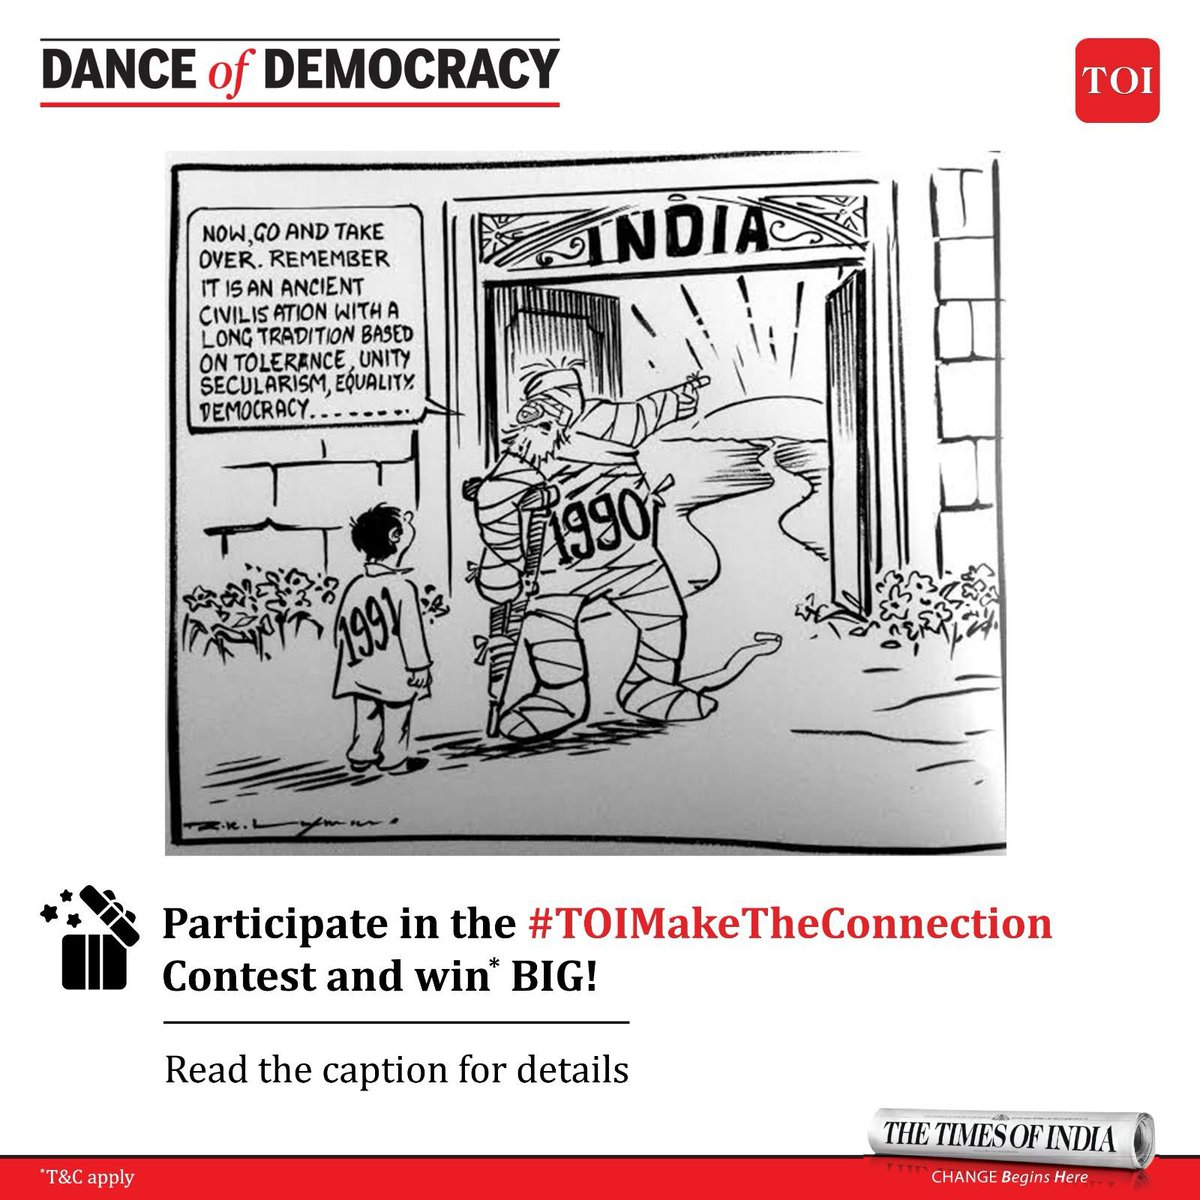 If you think you have the knack to make the connection between 'Then' and 'Now' i.e. what hasn't changed over the years in the world’s largest democracy, then here’s your chance to win BIG! 💰 HOW TO PARTICIPATE: 1️⃣Share the above cartoon on your Instagram/Facebook/LinkedIn or X